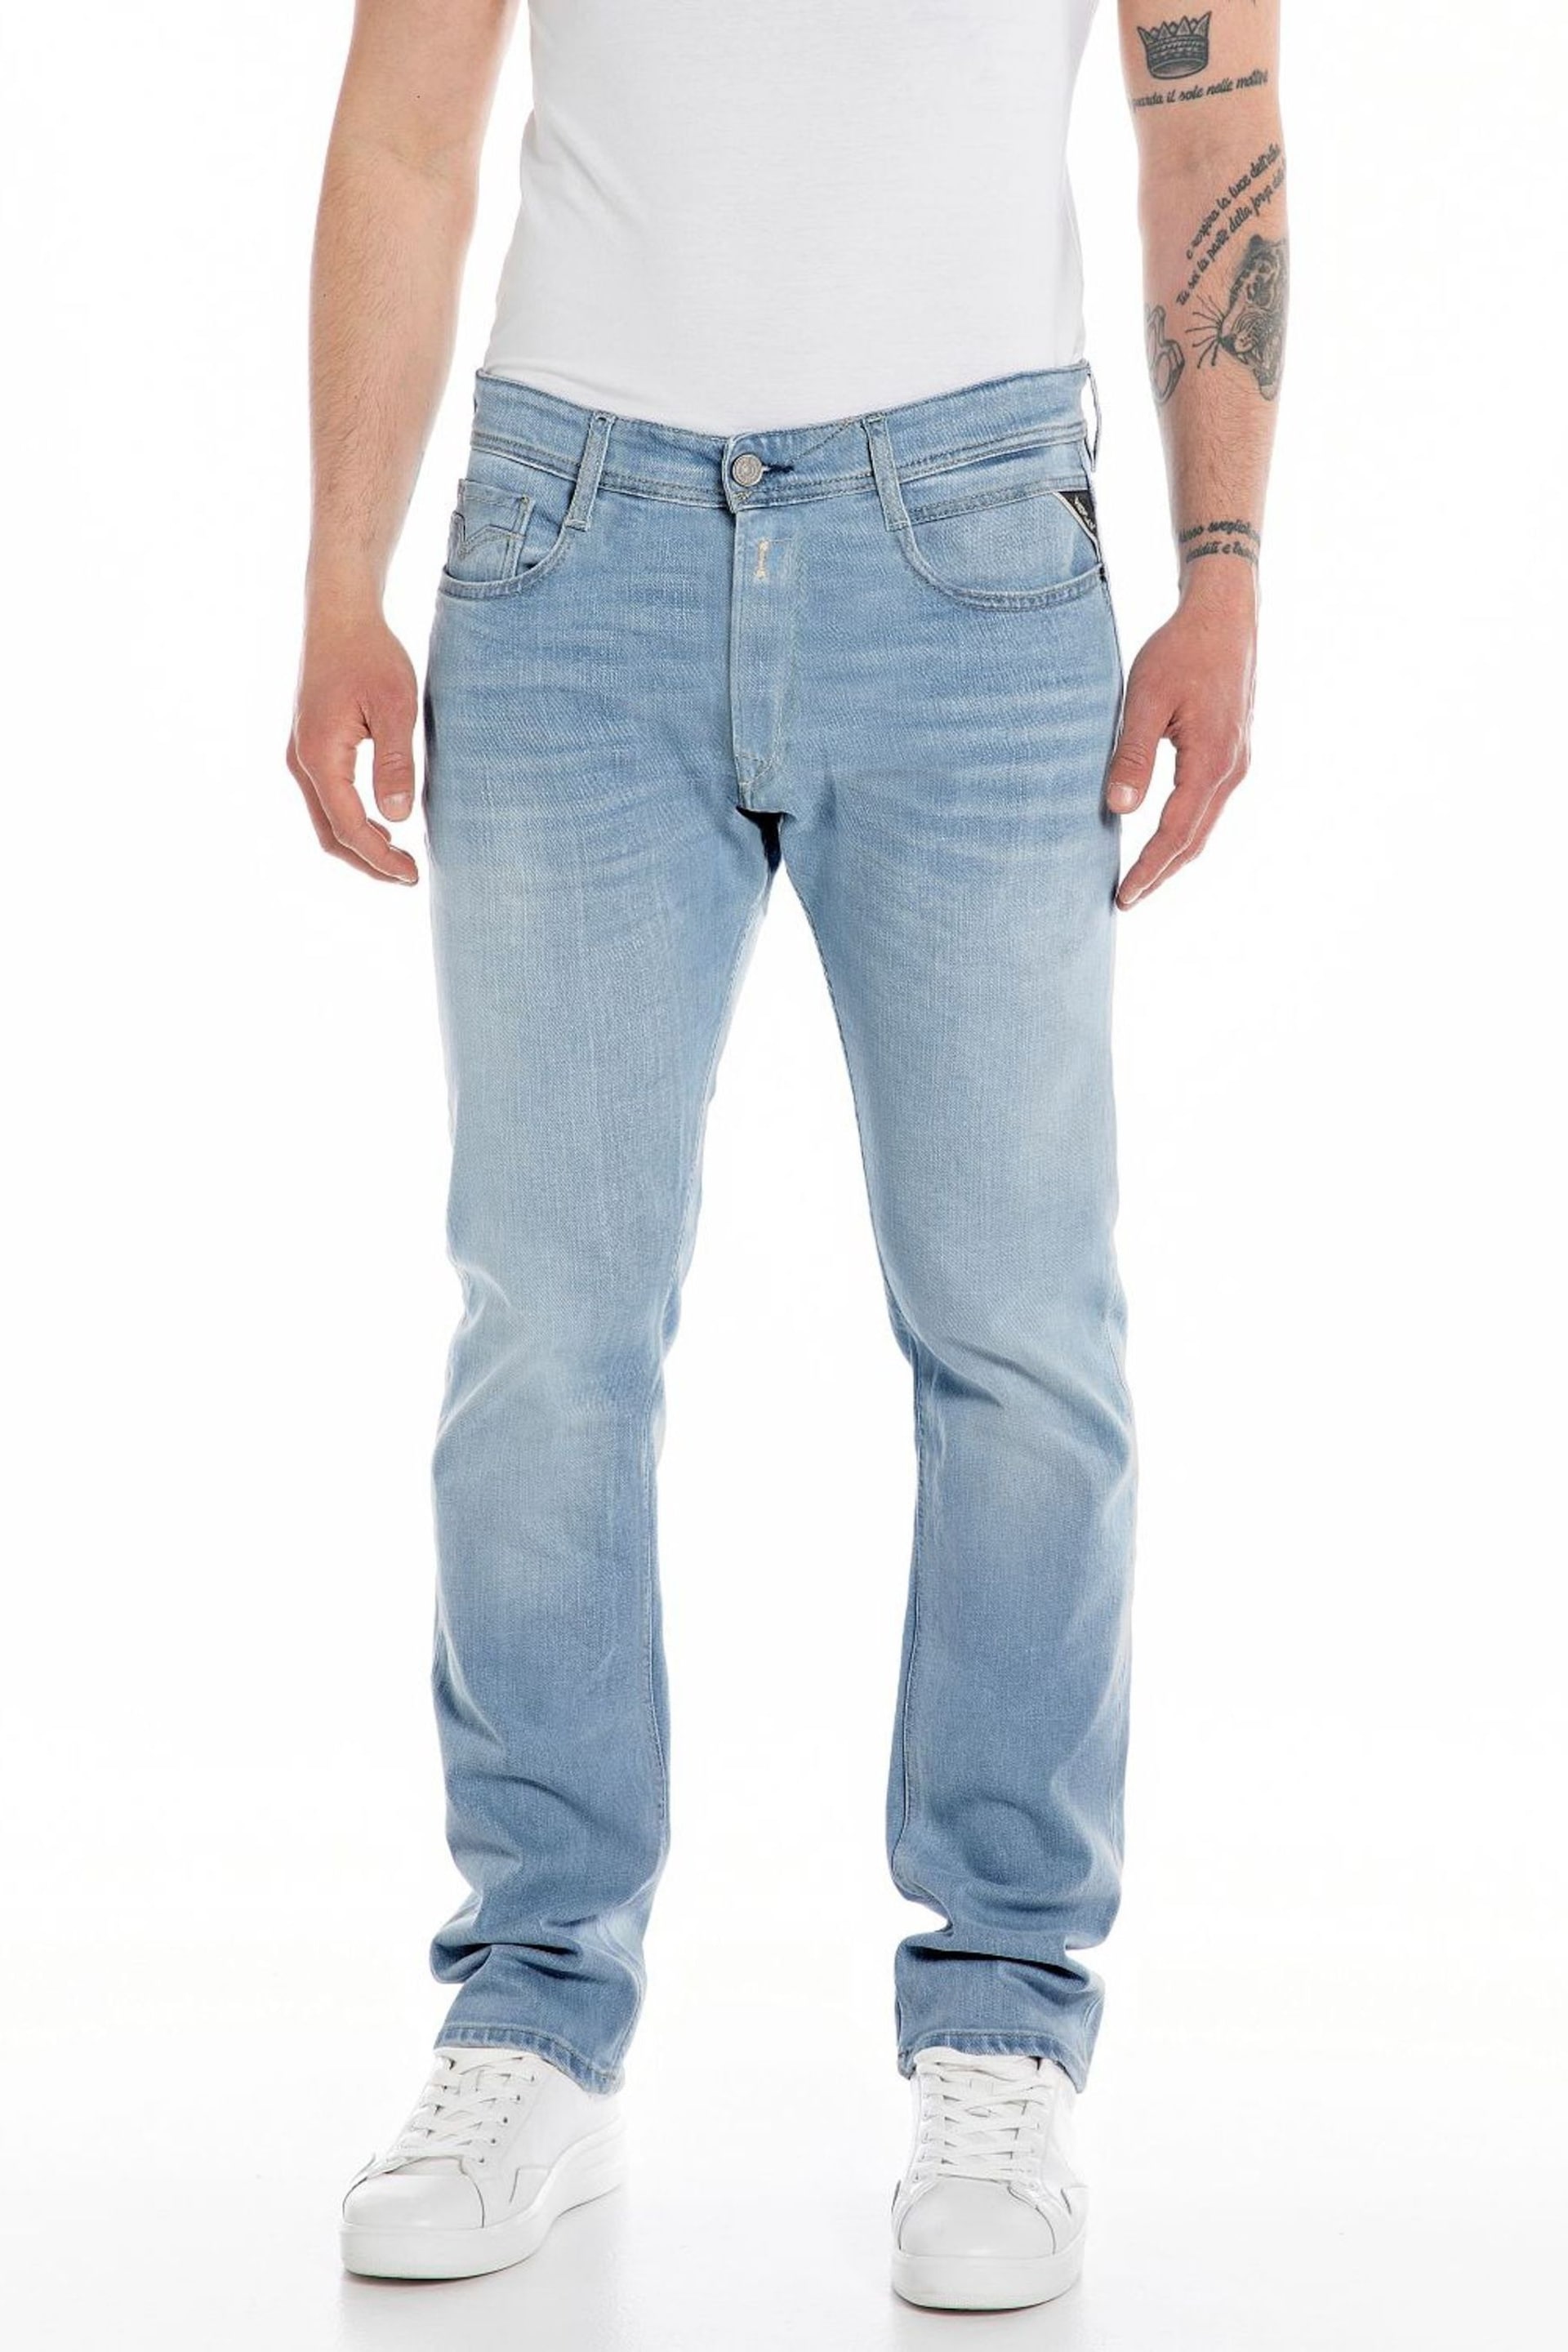 Replay Rocco Relaxed Straight Fit Jeans - Image 1 of 2